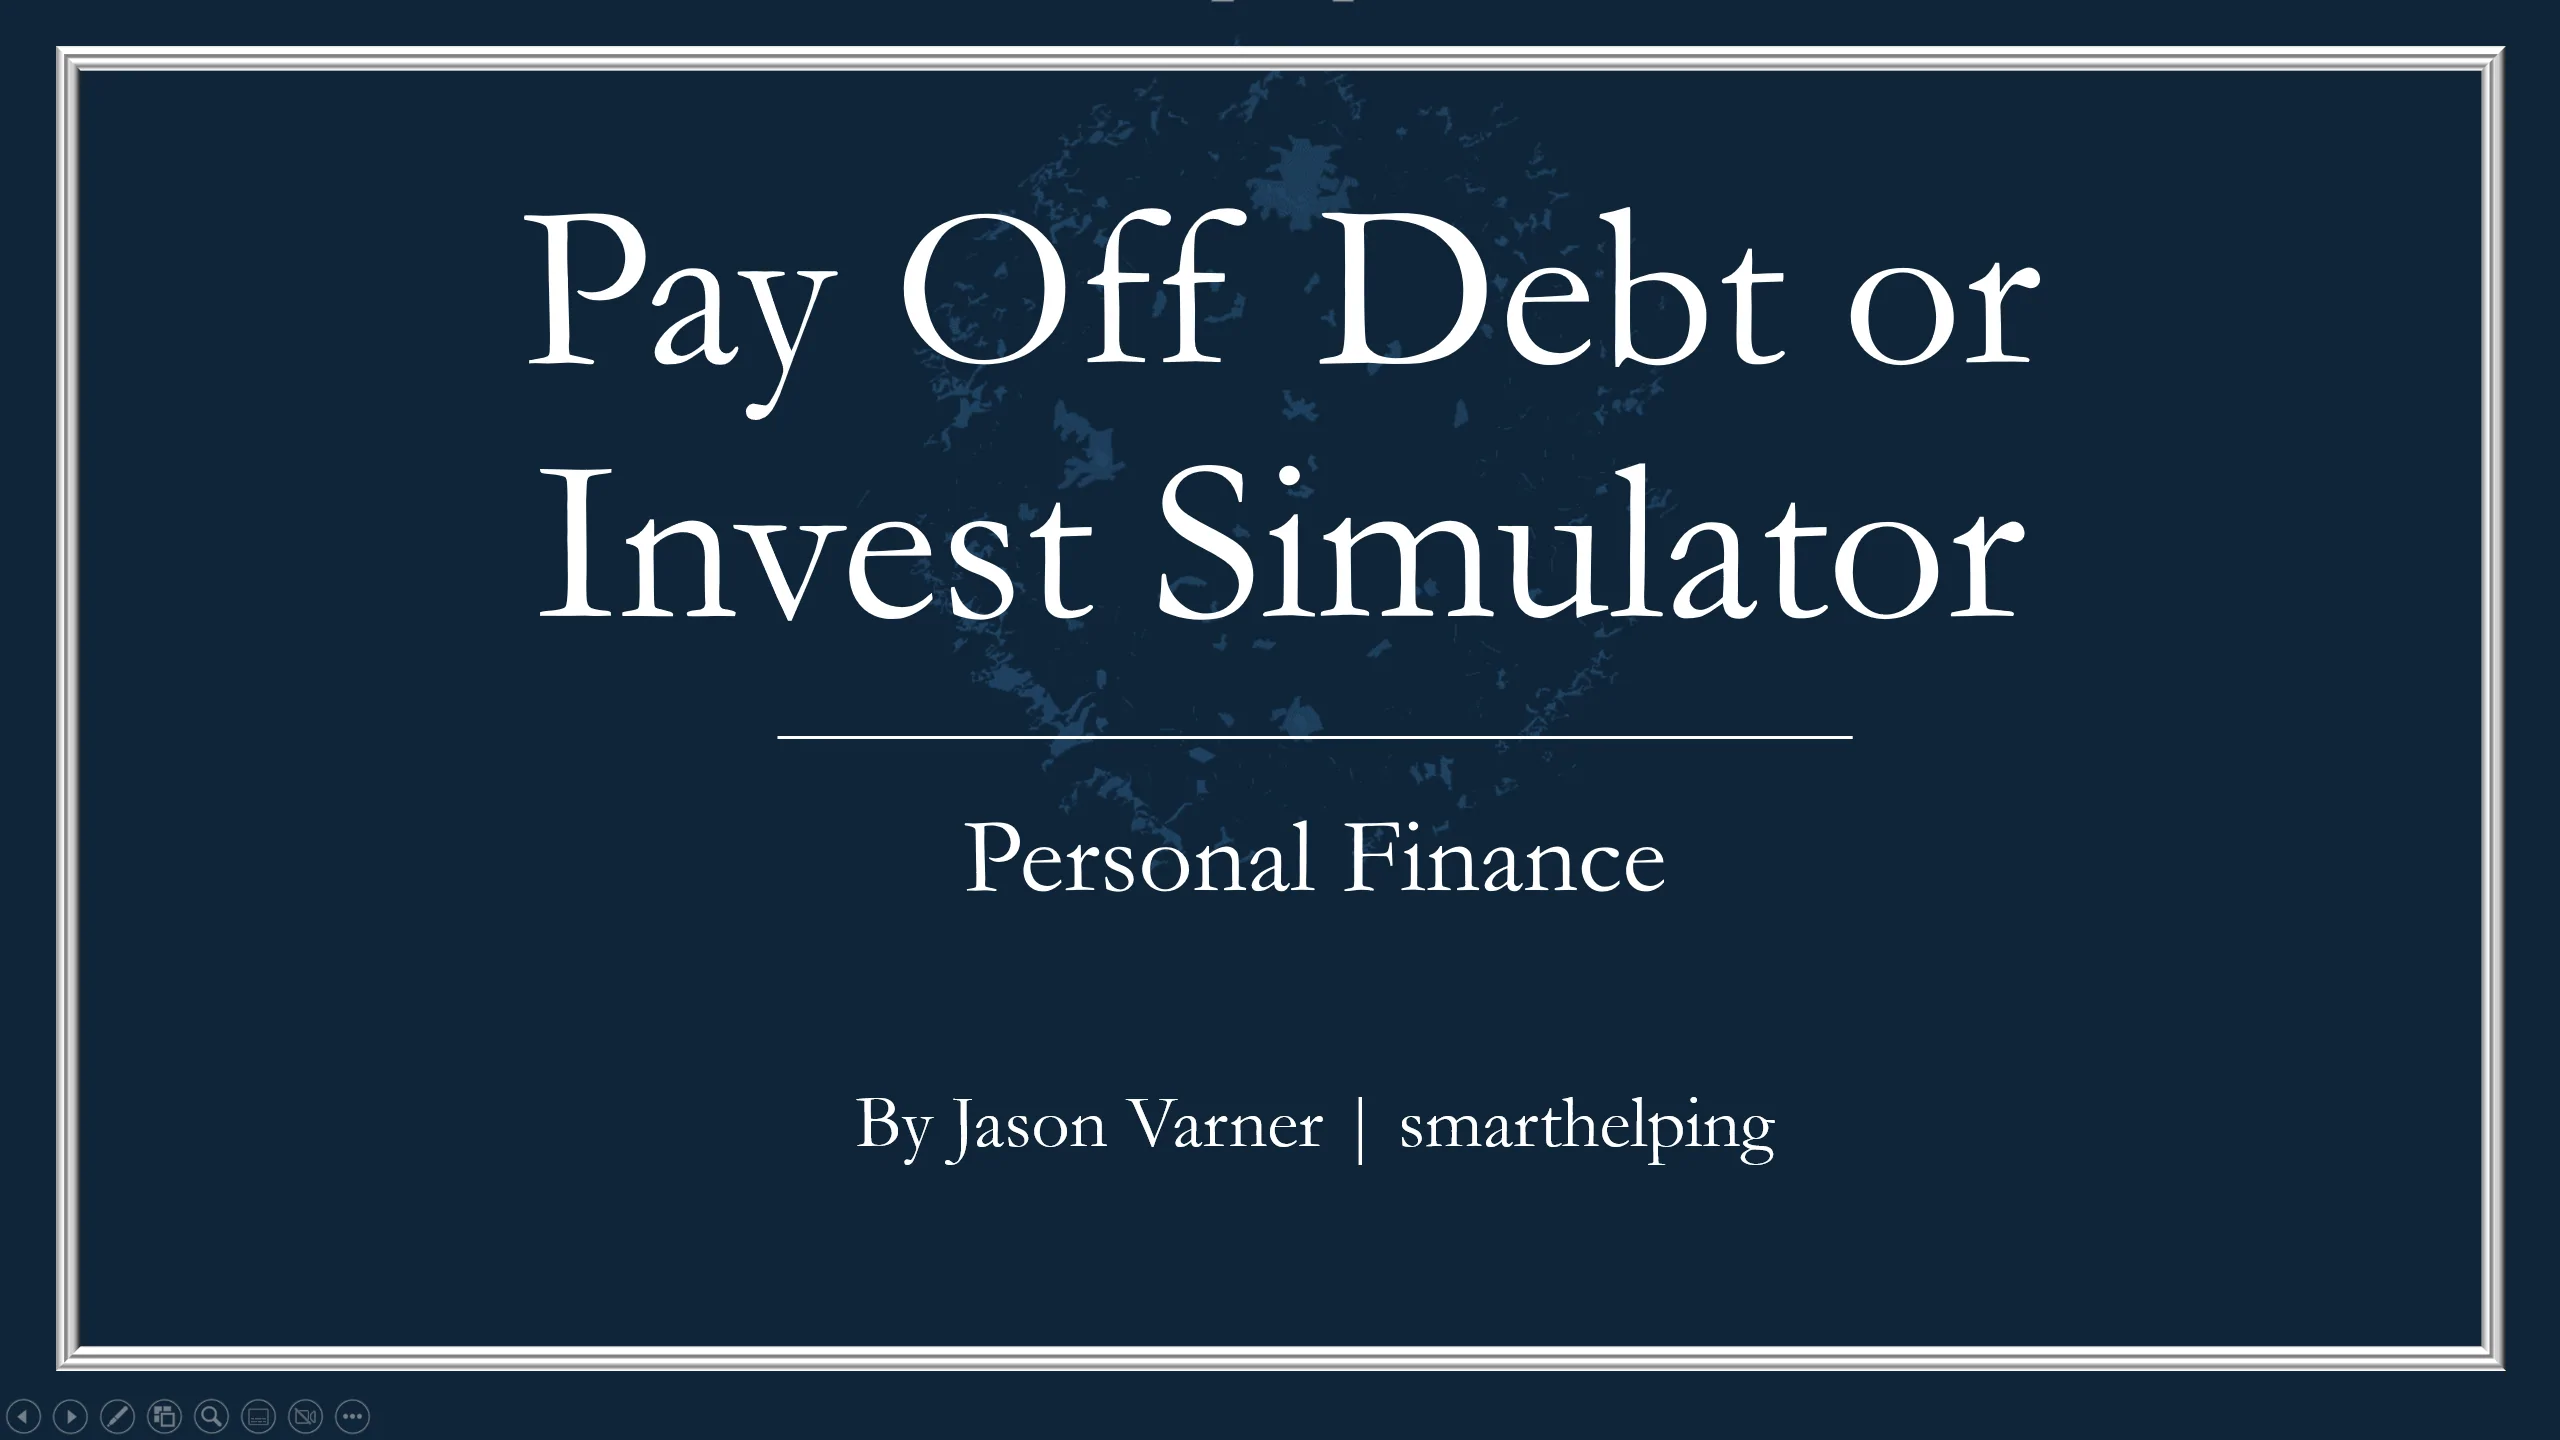 Pay Off Debt or Invest Simulation